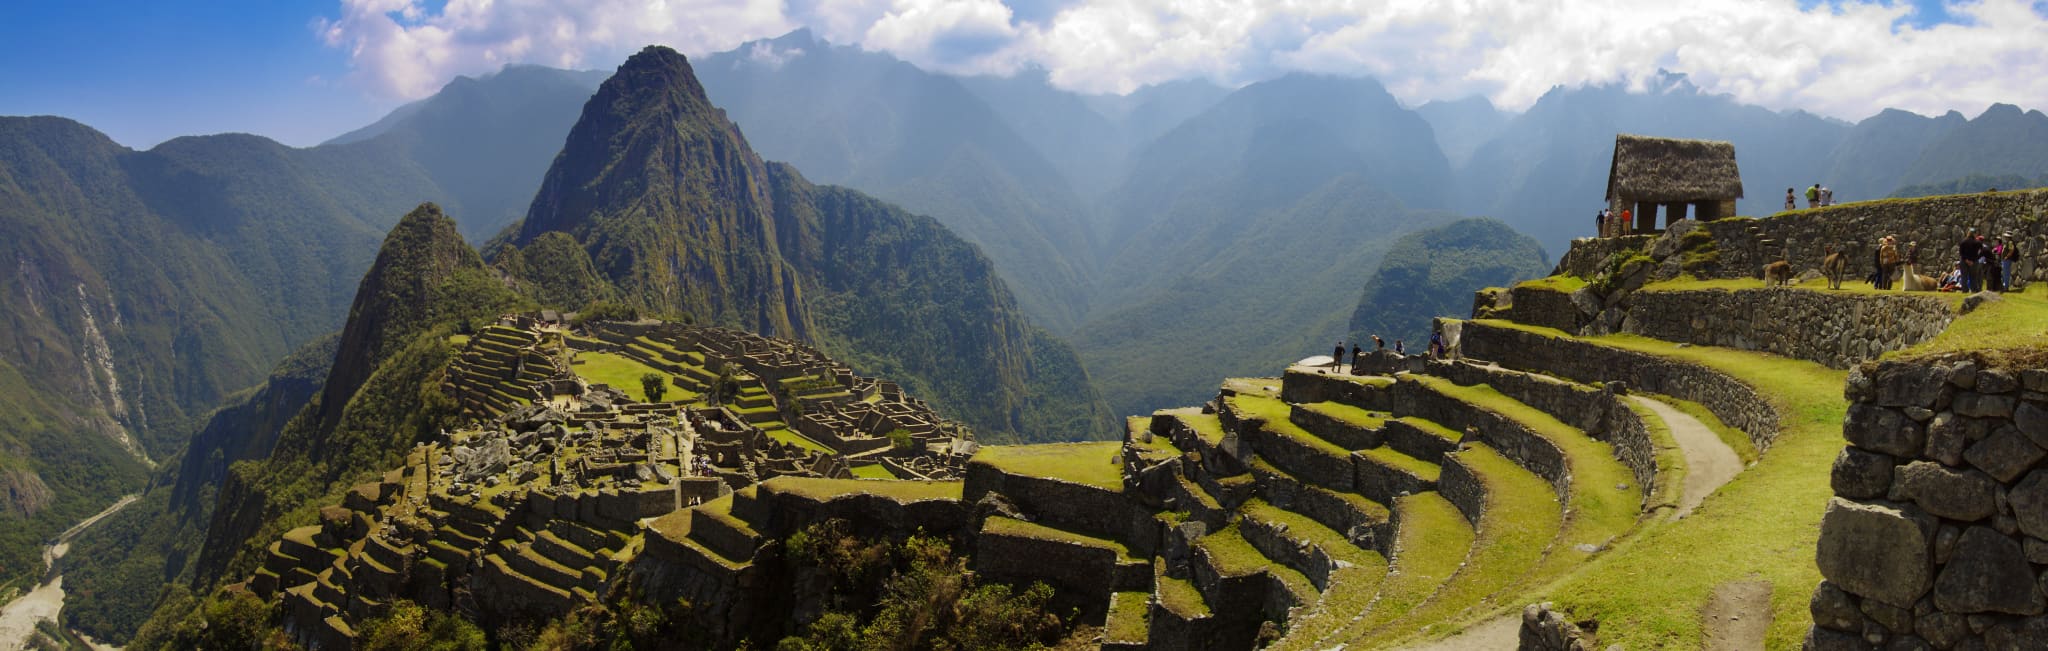 package holiday to peru